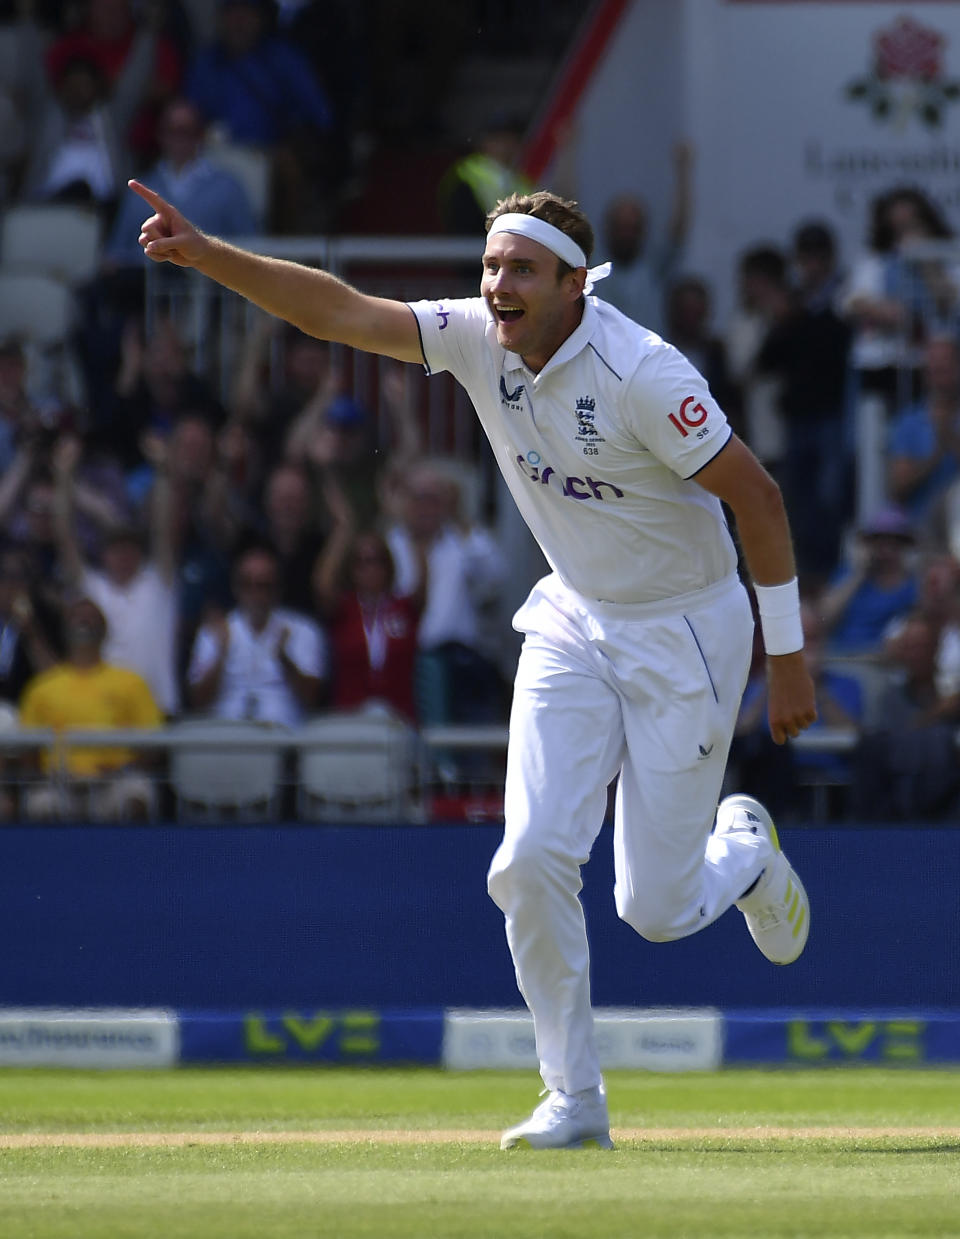 England's Stuart Broad celebrates the dismissal of Australia's Travis Head during the first day of the fourth Ashes cricket Test match between England and Australia at Old Trafford in Manchester, England, Wednesday, July 19, 2023. (AP Photo/Rui Vieira)